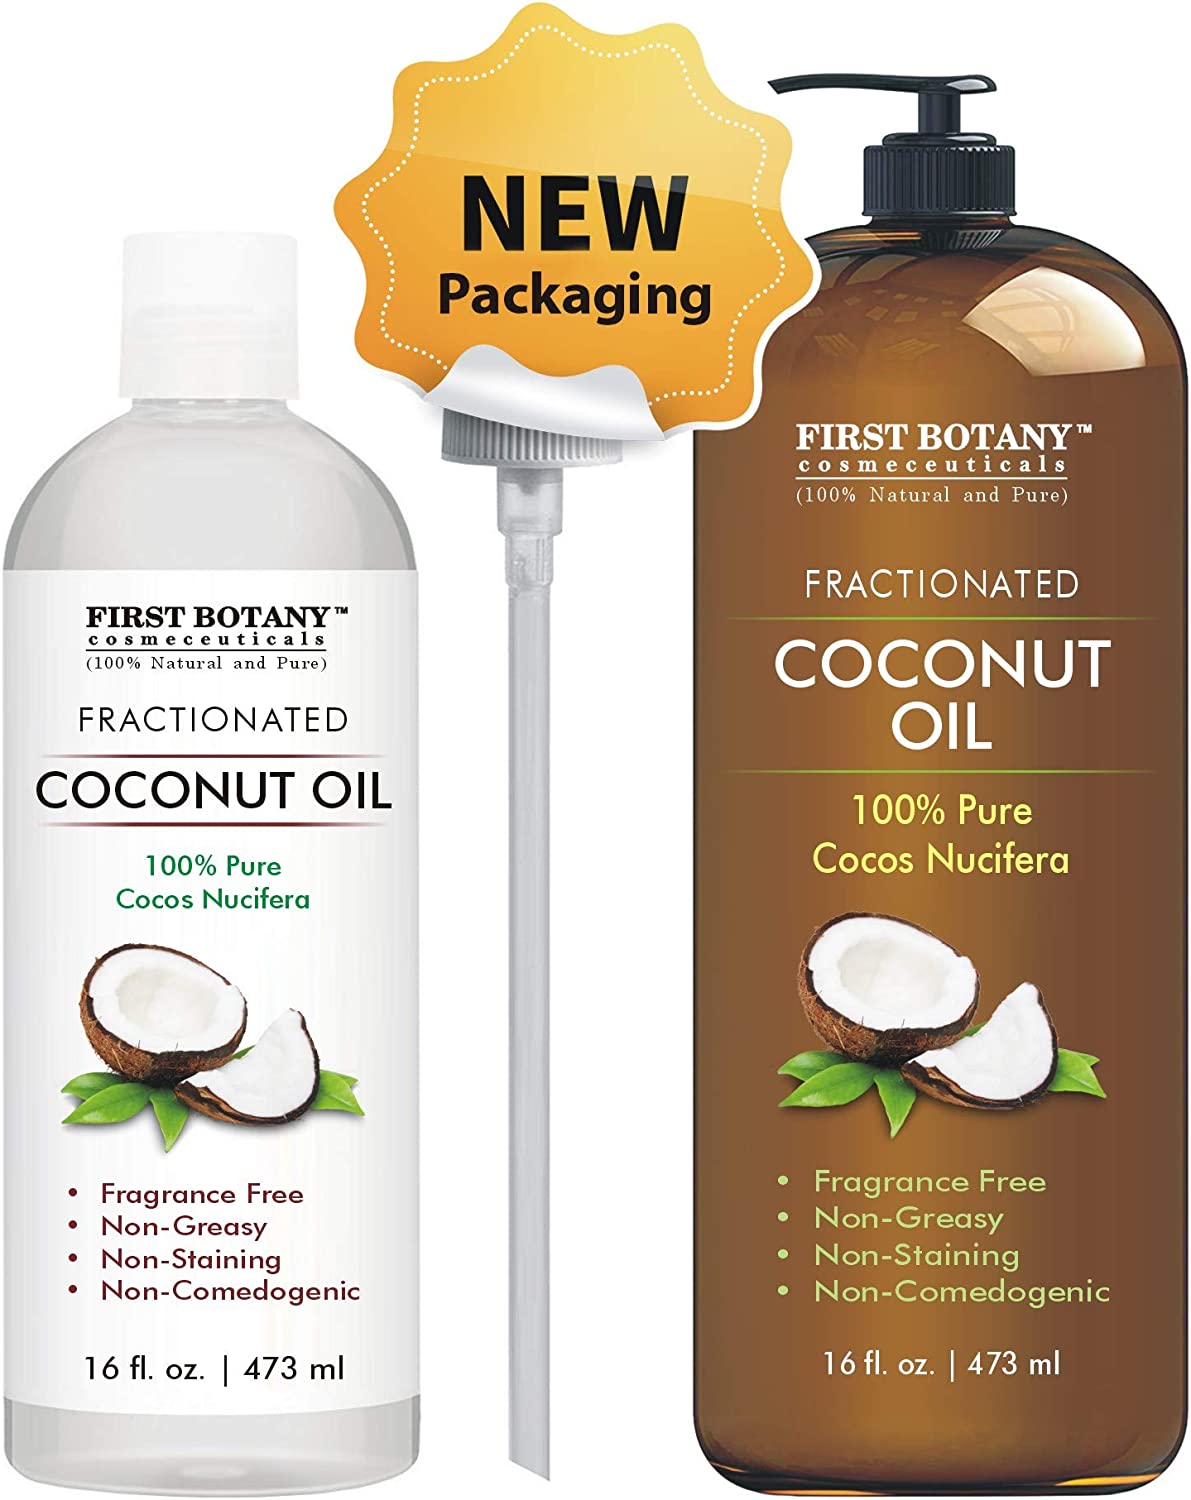 Fractionated Coconut Oil 16 fl. oz - 100% Natural & Pure MCT Coconut Oil